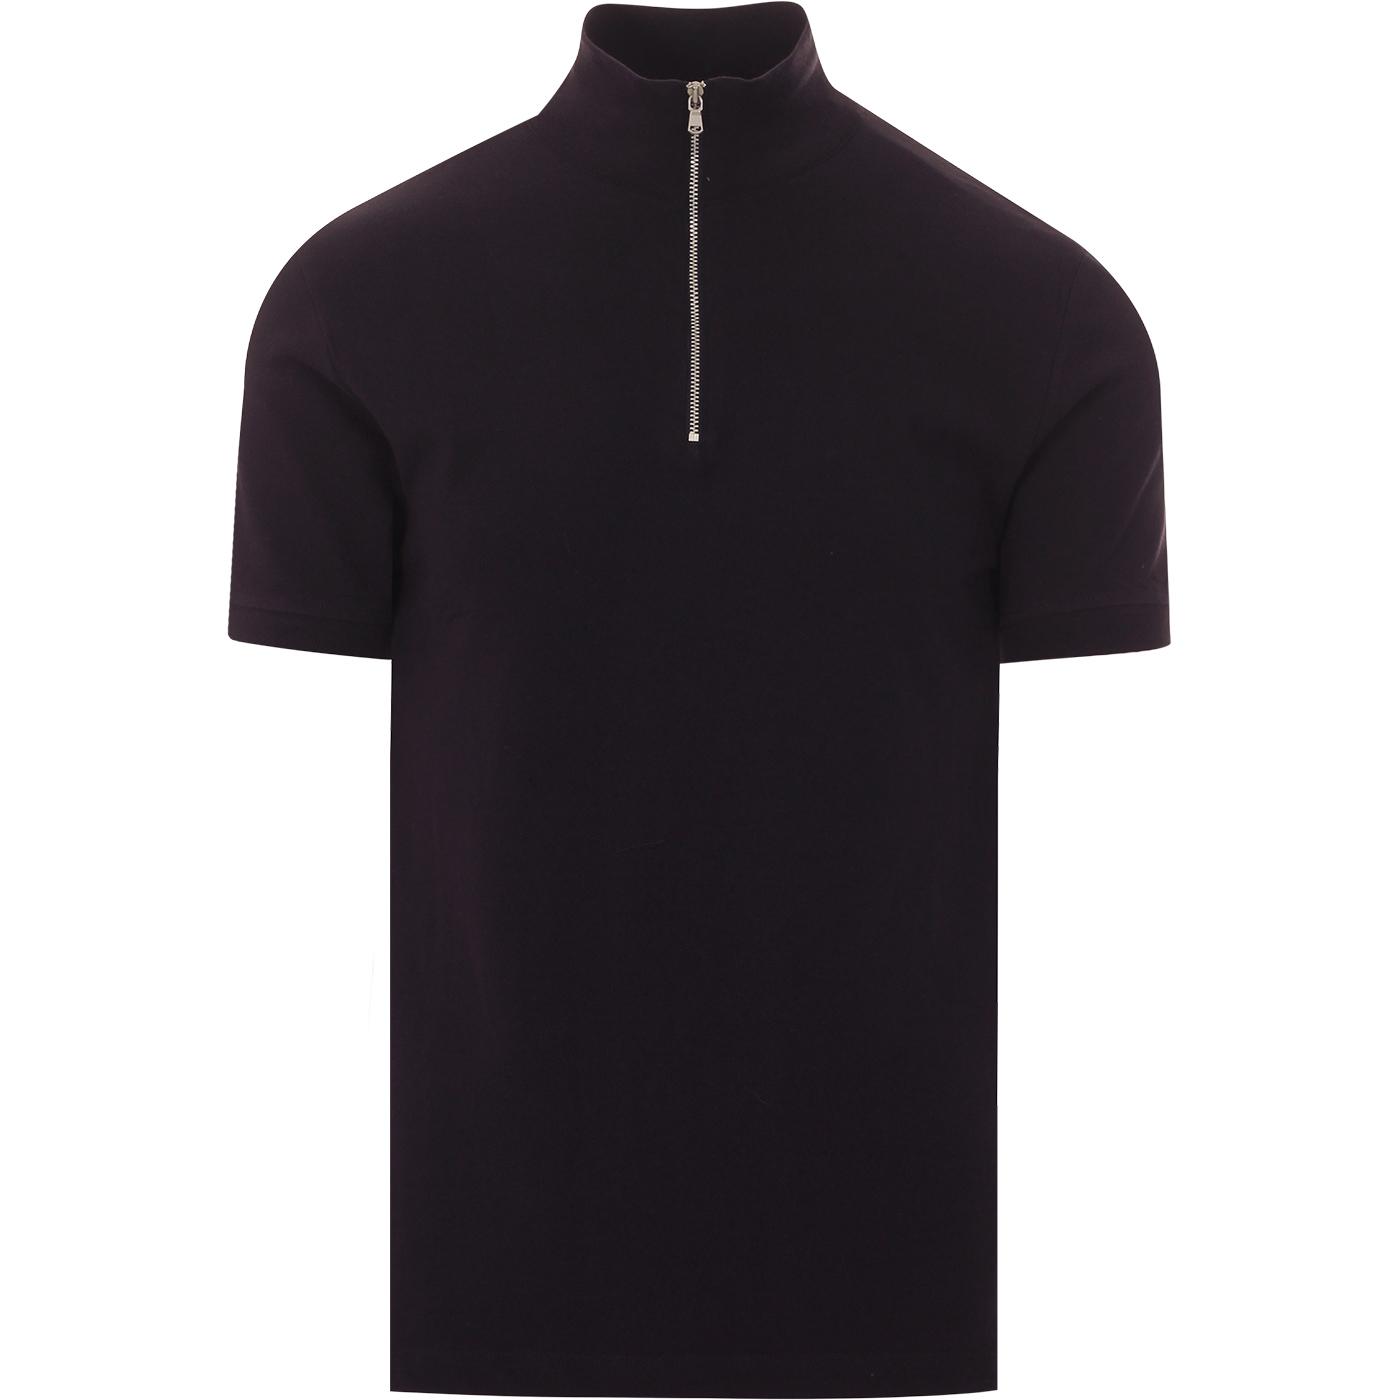 FRENCH CONNECTION Mod Funnel Neck Polo Shirt